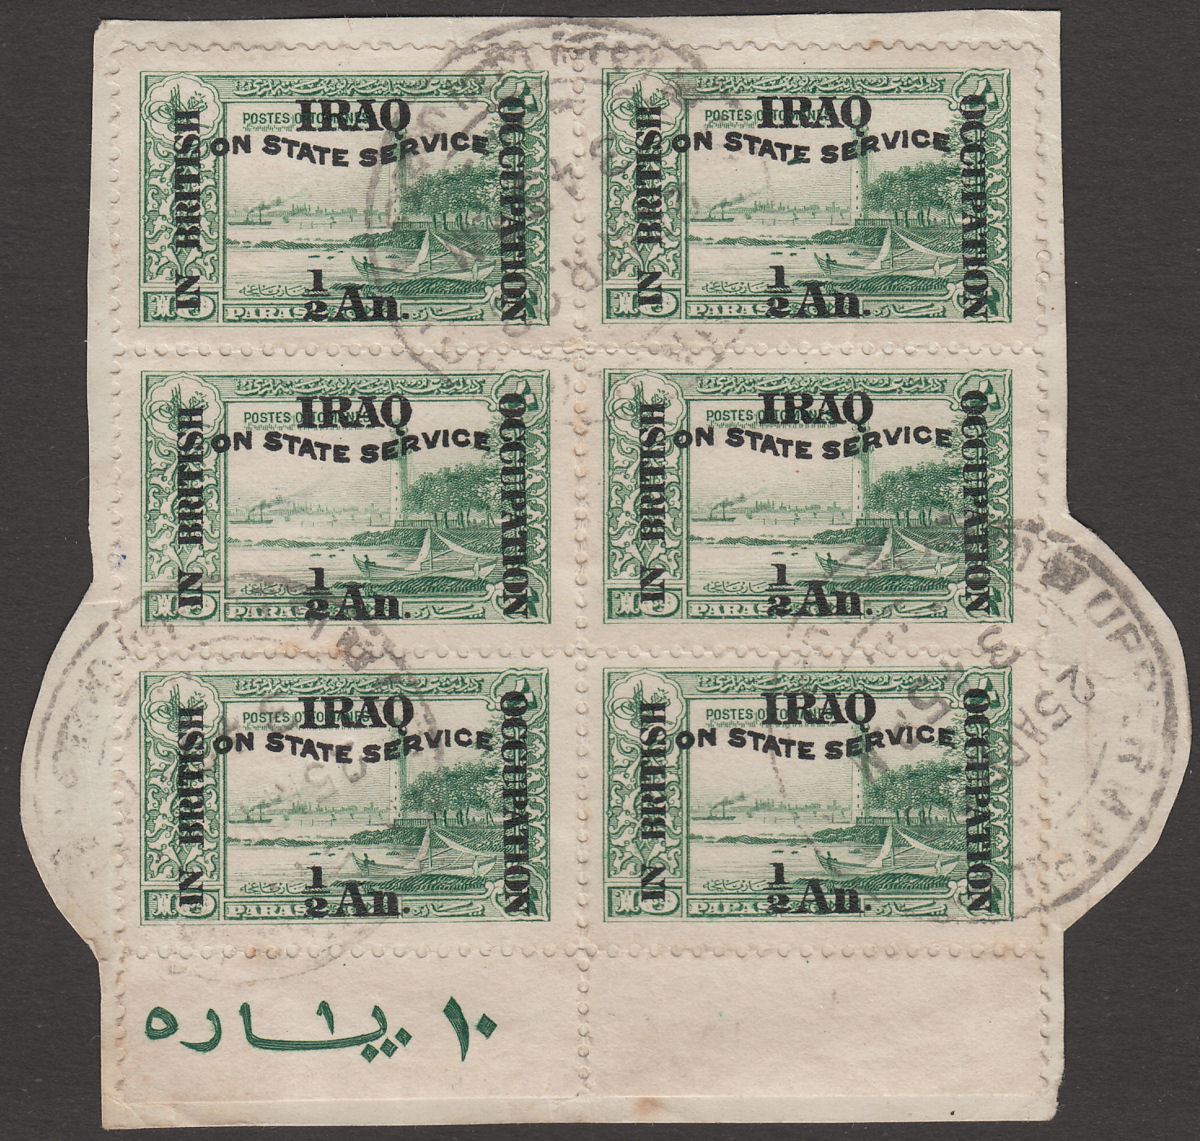 Iraq 1921 KGV Official Service ½a Surcharge on 10pa Block of 6 Used UPPER MAQIL